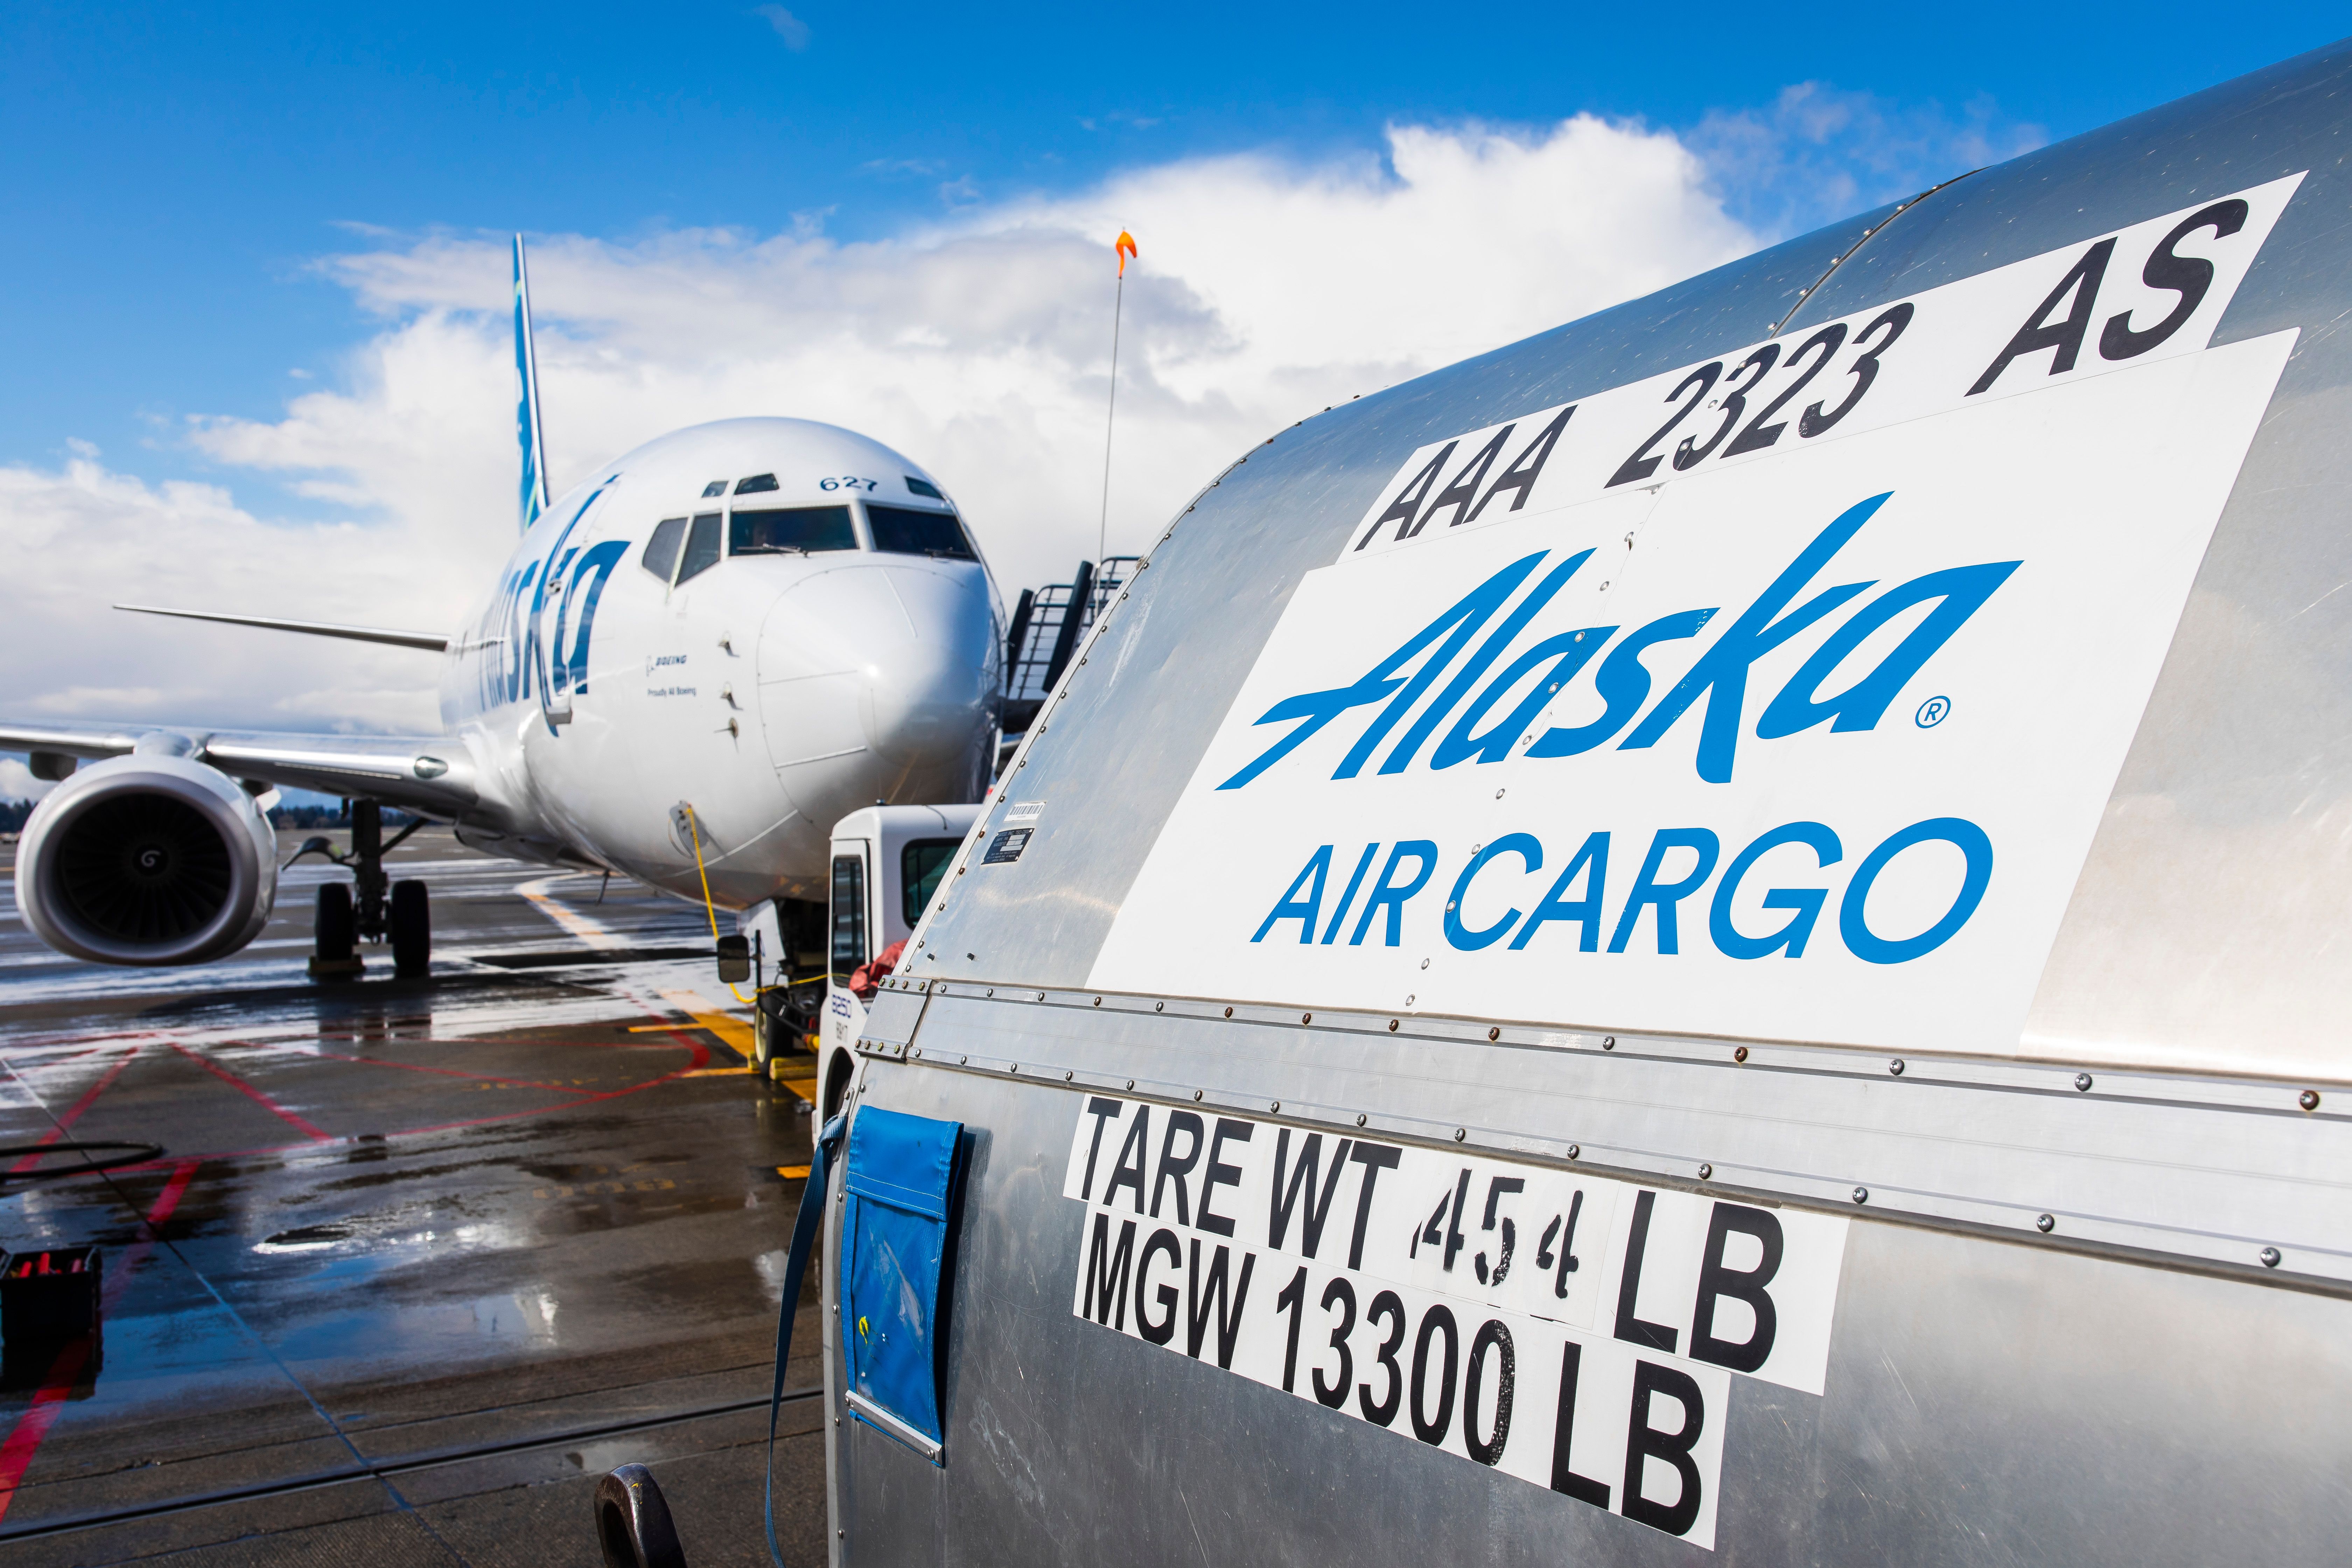 Alaska Airlines Cargo Shipment container in front of aircraft